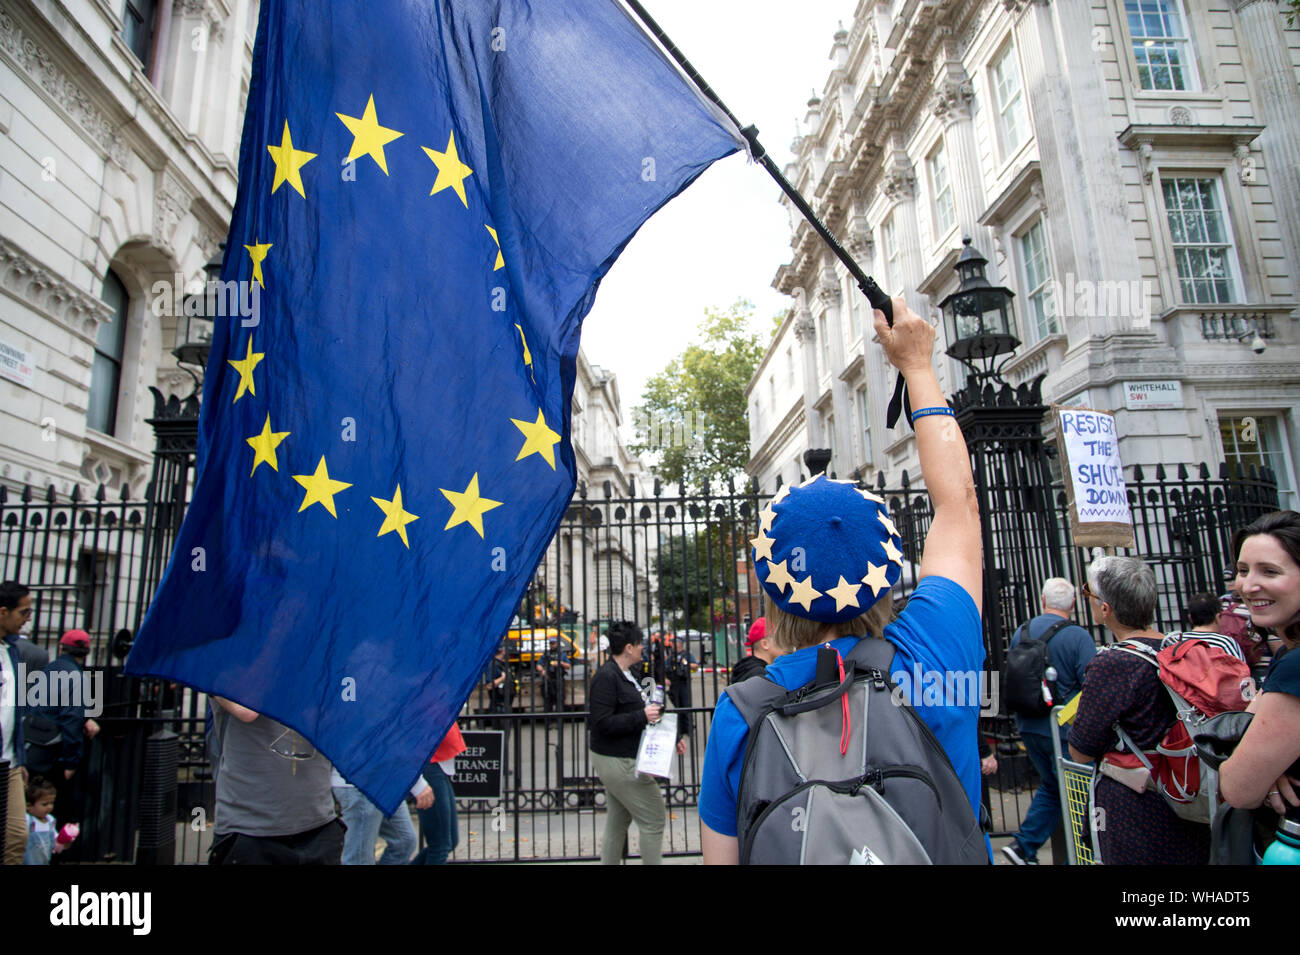 Parliament, Whitehall 2.9.2019. A Remain supporter protests outside Downing Street, waving a European flag Stock Photo